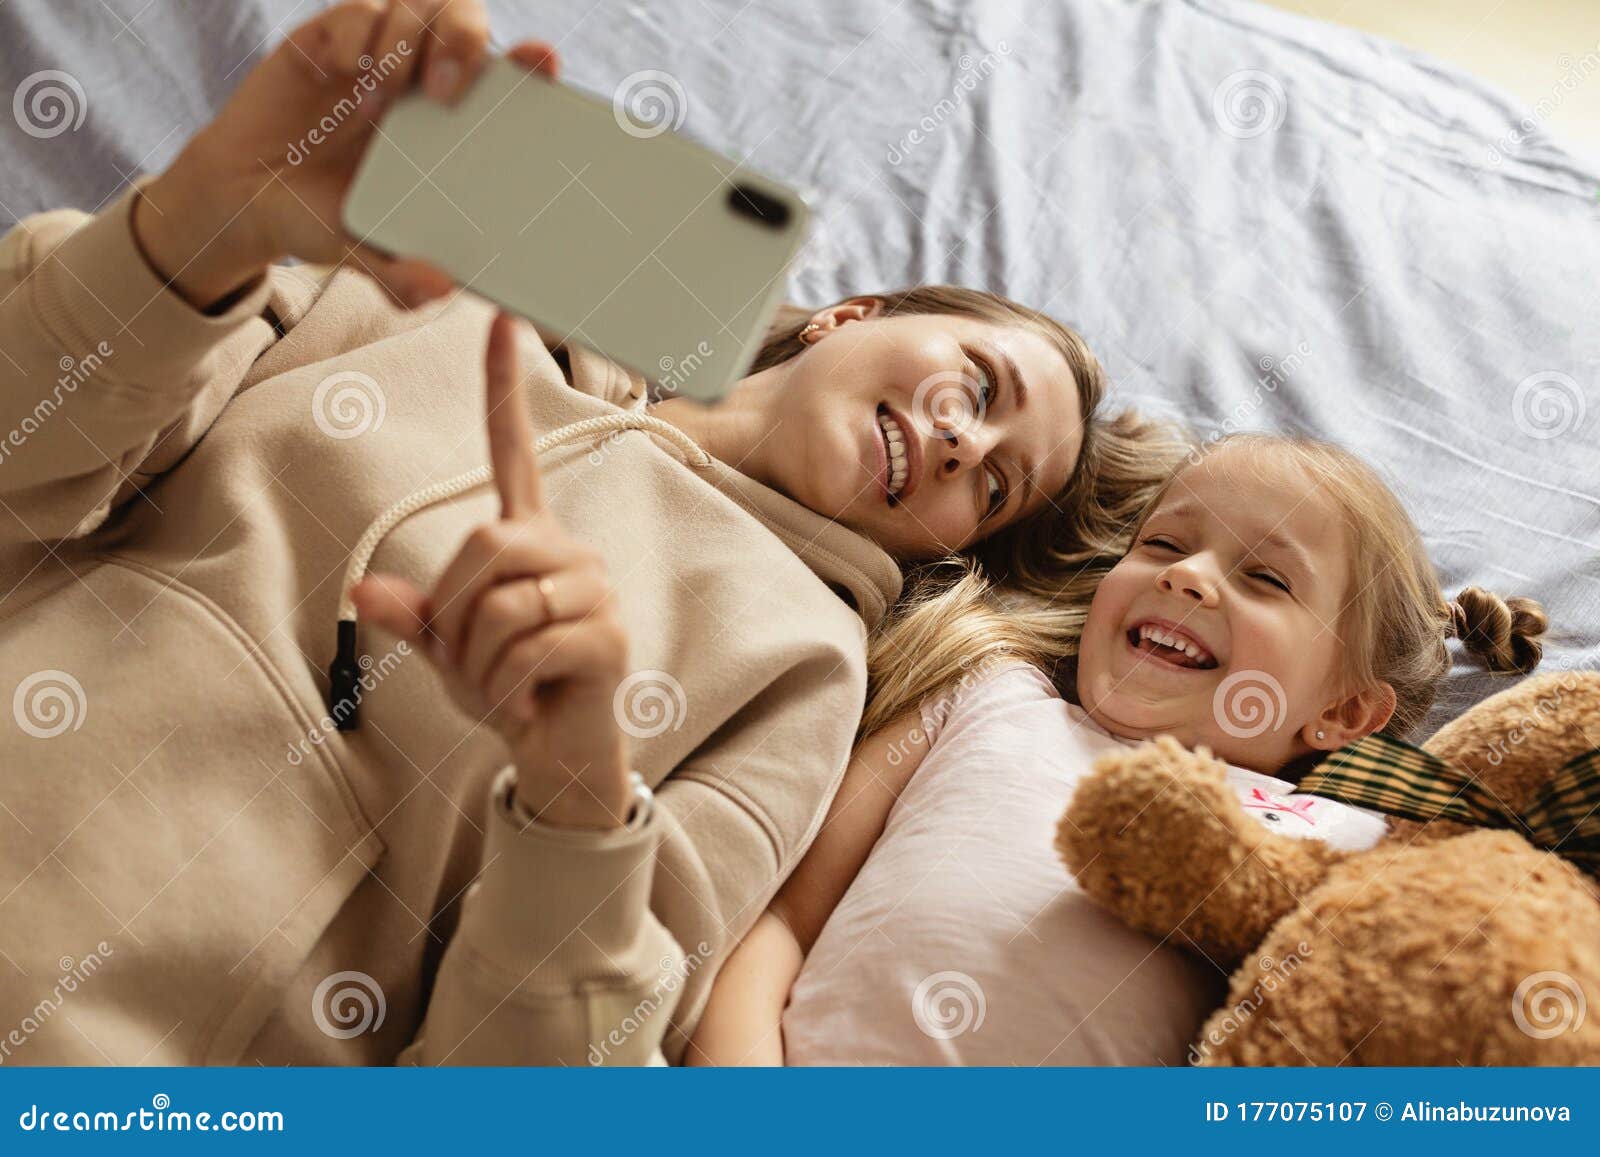 Mom and Daughter Watching Video on Smartphone with Smiley Face Alone on ...